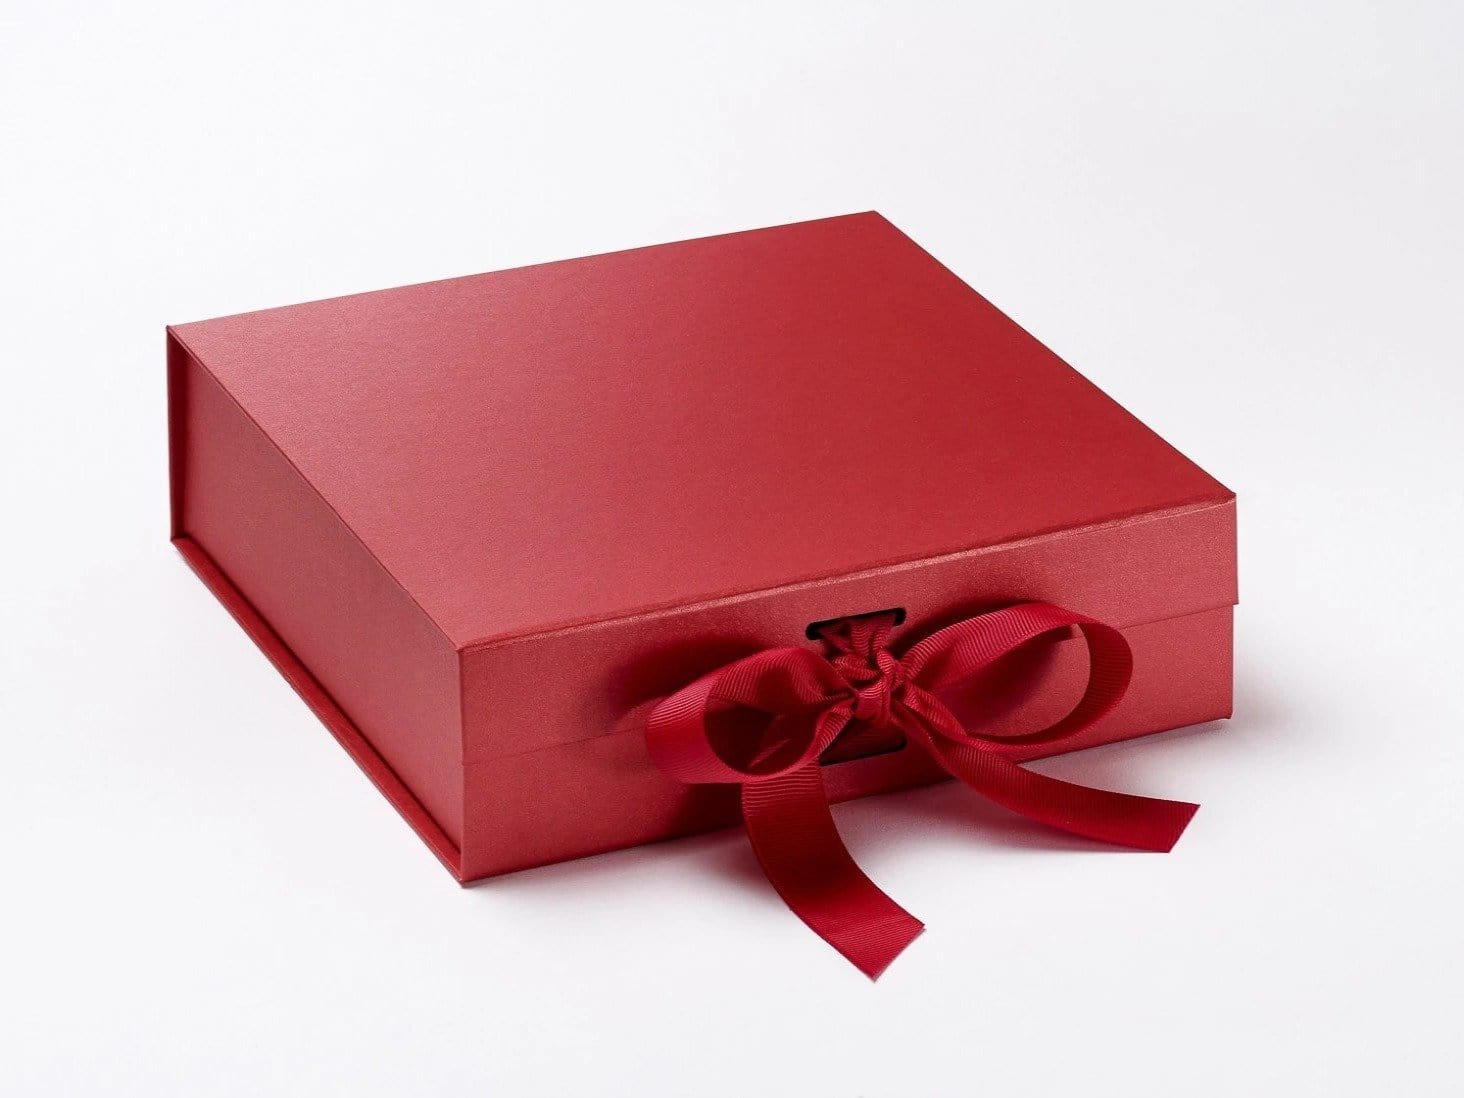 Medium Red Slot Gift Box with changeable ribbon and magnetic closures from Foldabox